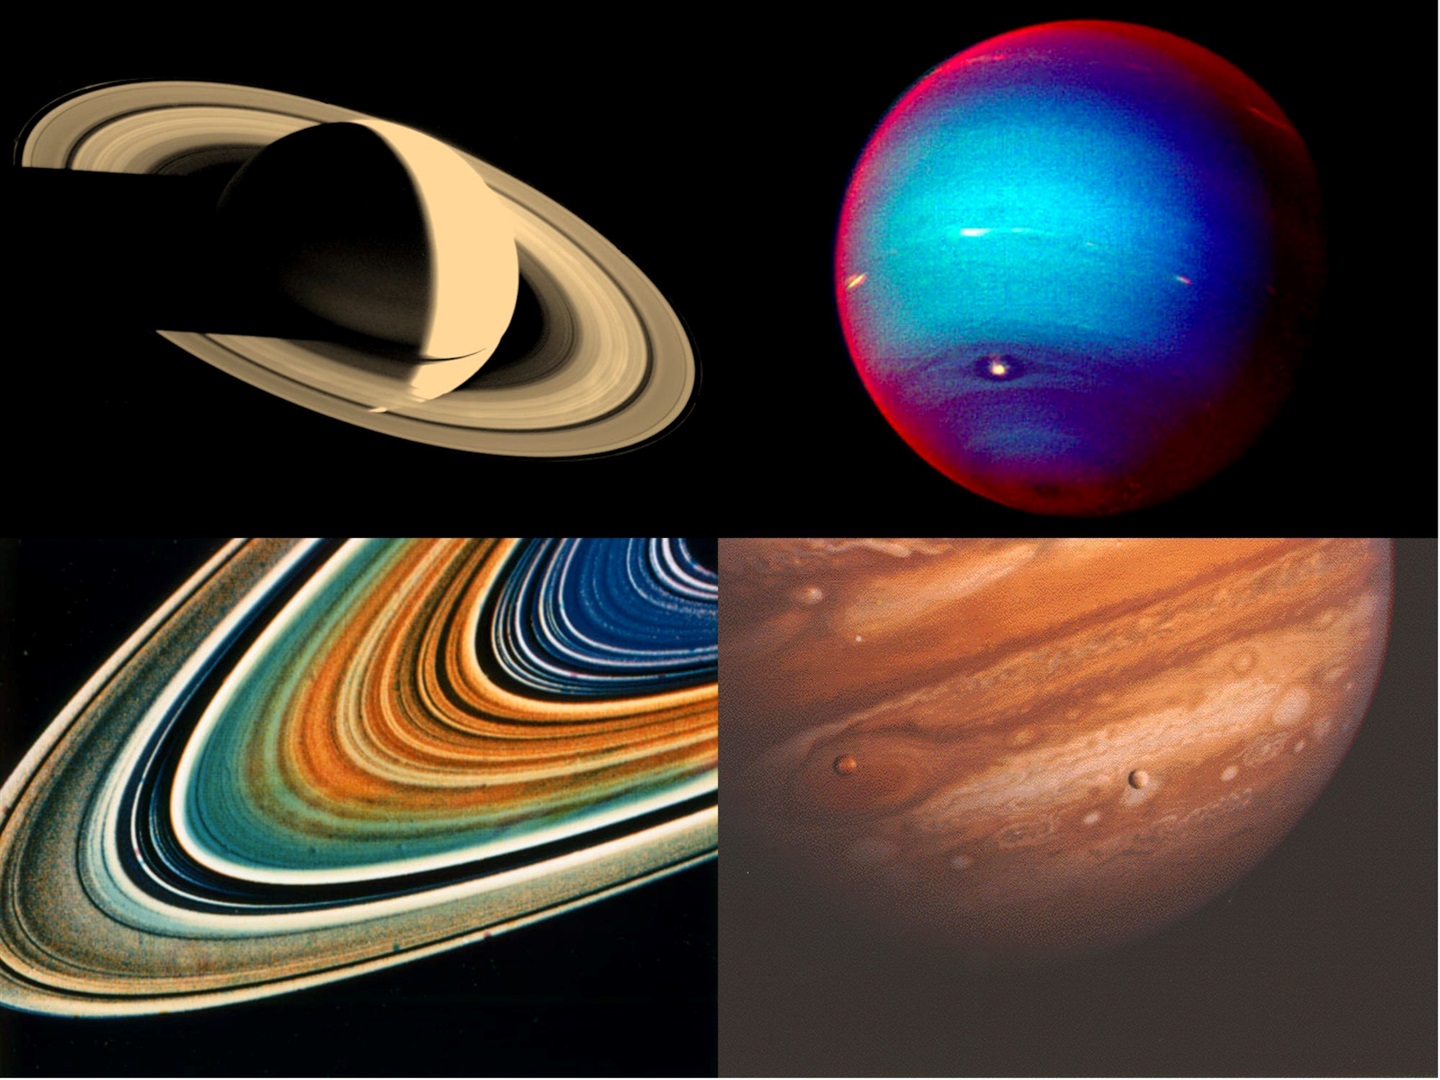 This montage shows examples of striking images of the solar system taken by Voyager 1 and 2 on their missions. NASA/JPL/Insider